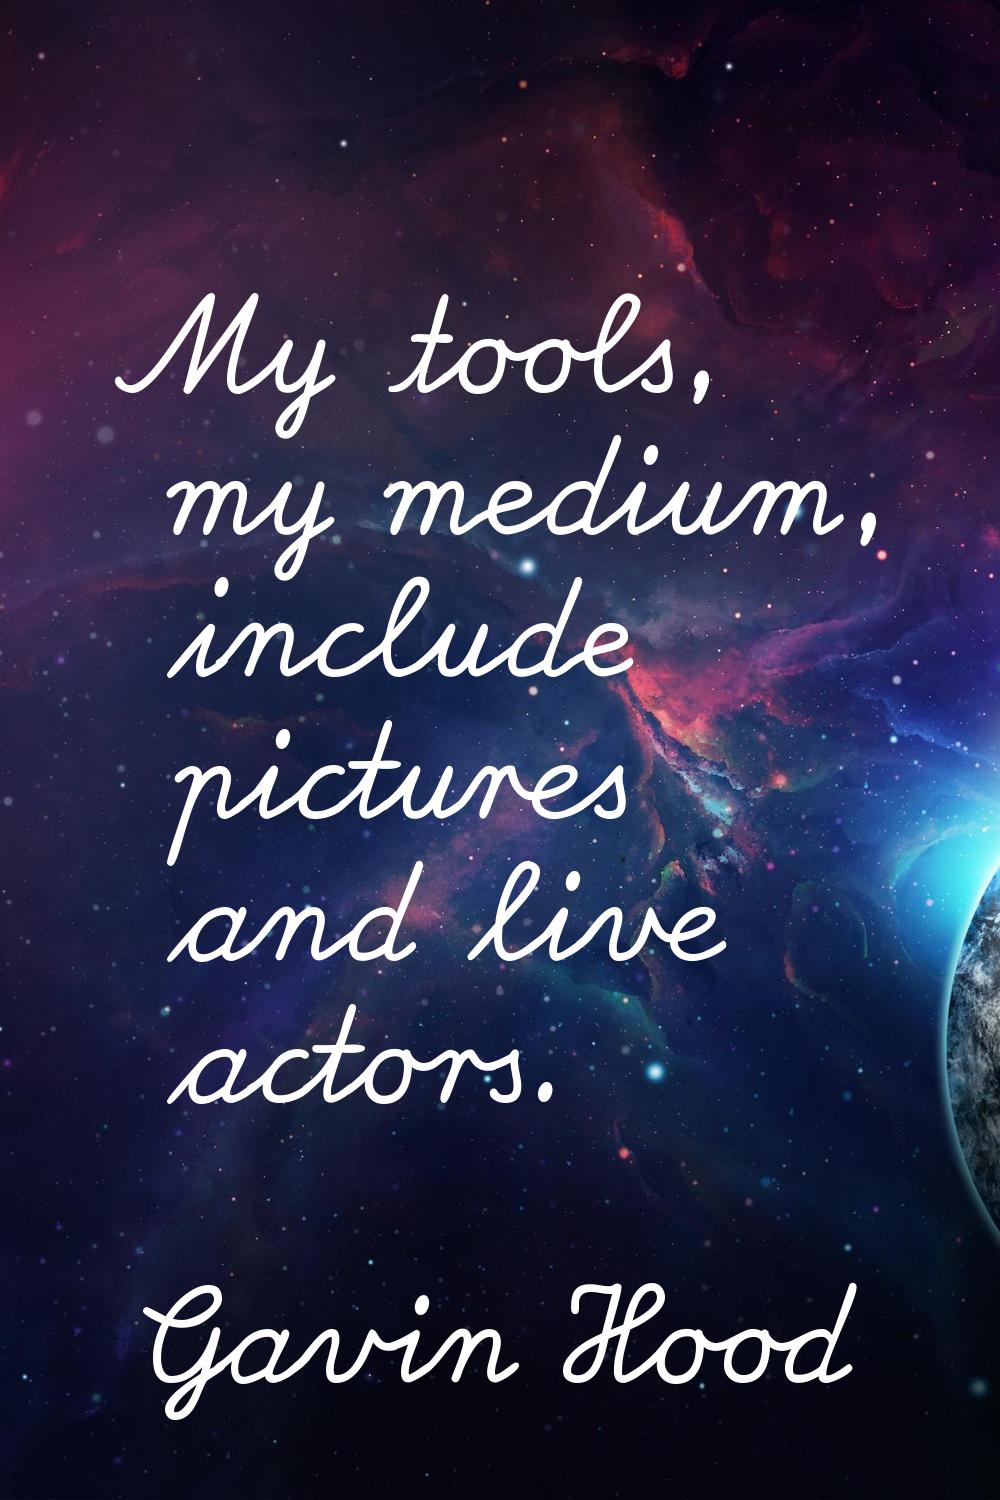 My tools, my medium, include pictures and live actors.